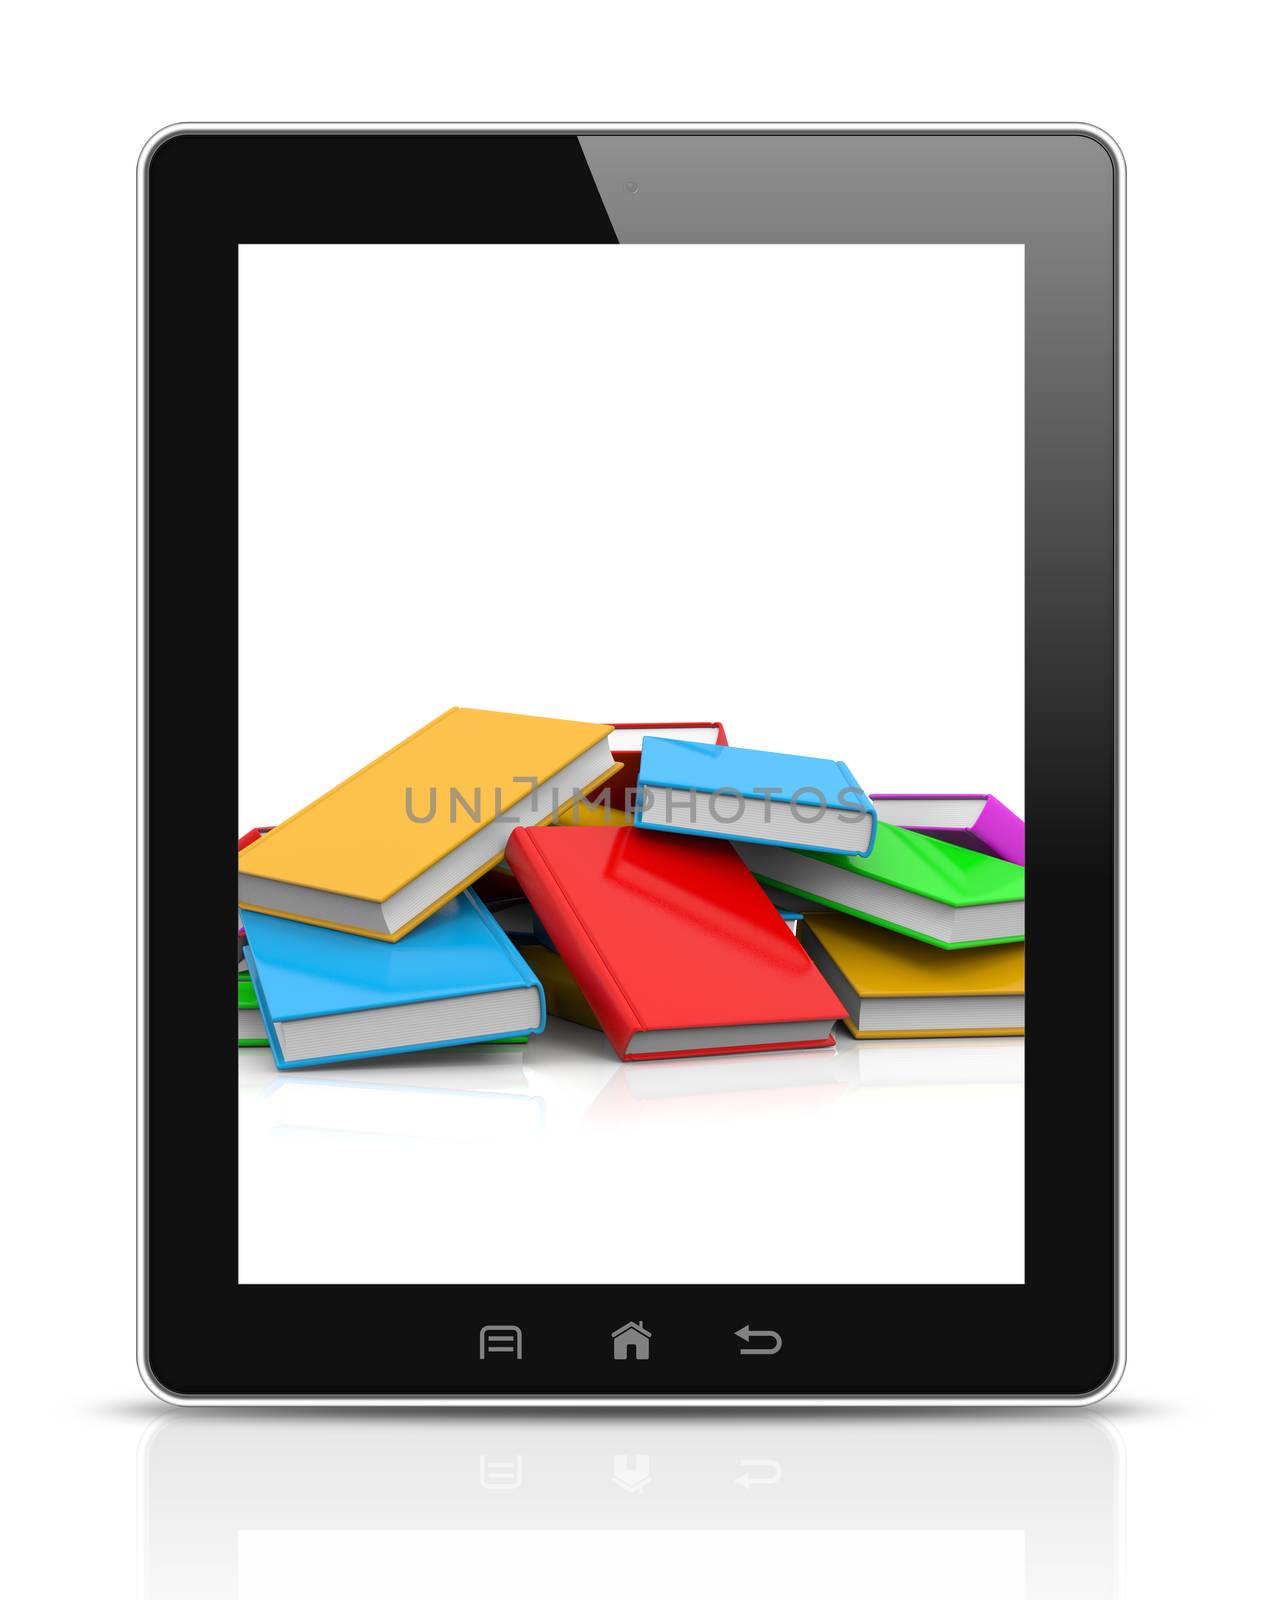 Tablet Pc Showing an Heap of Books by make